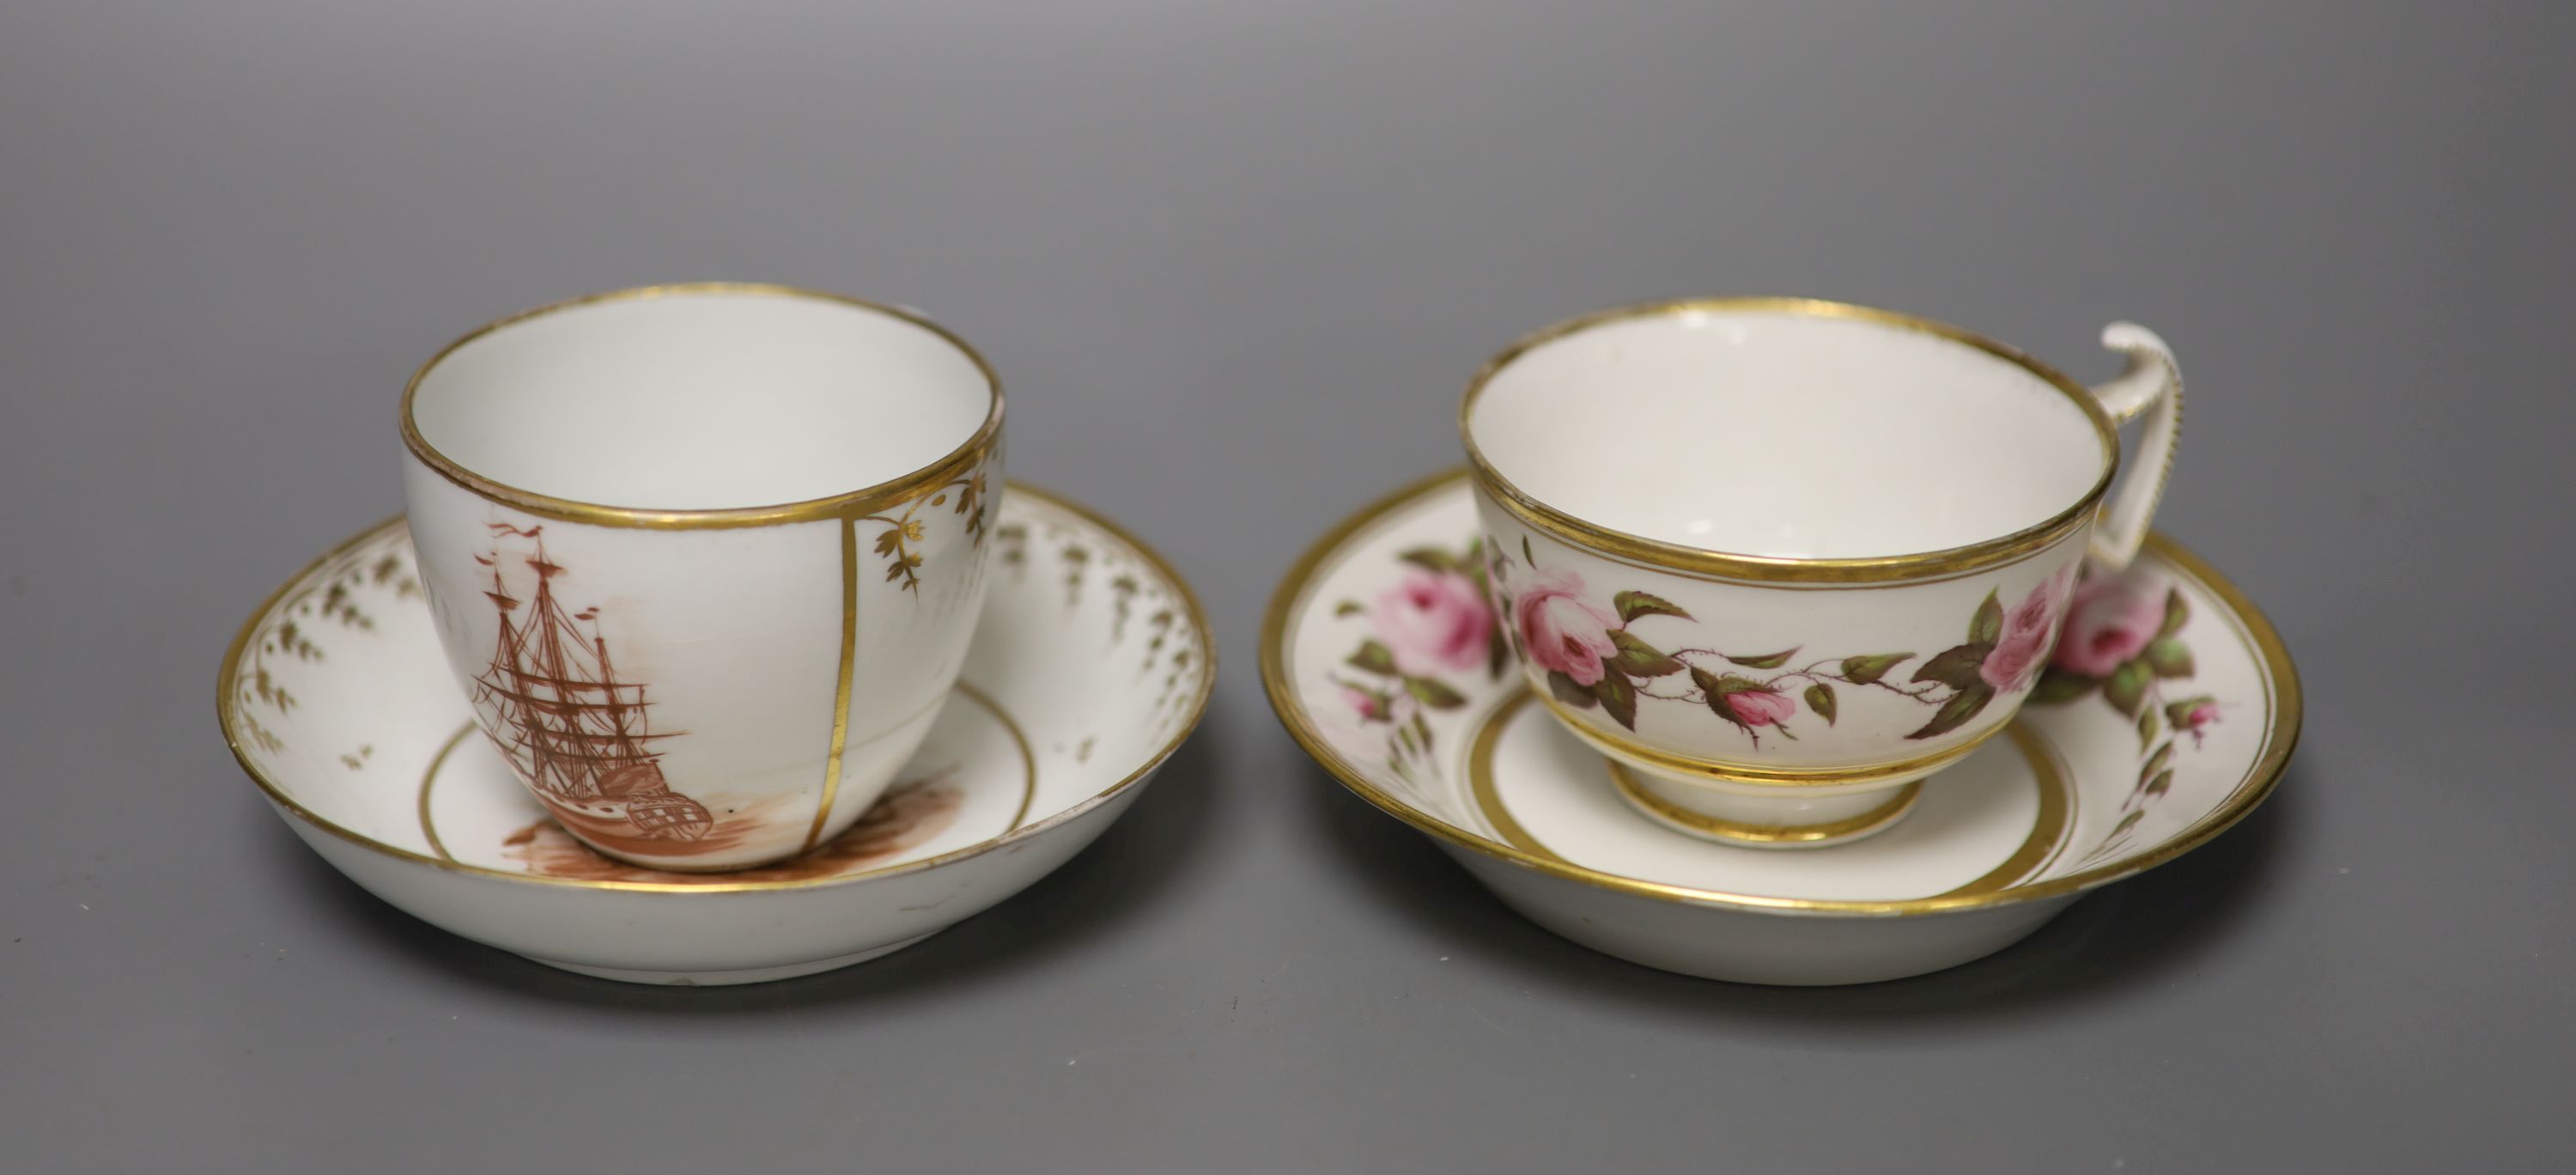 A Flight Barr and Barr Worcester teacup and saucer,